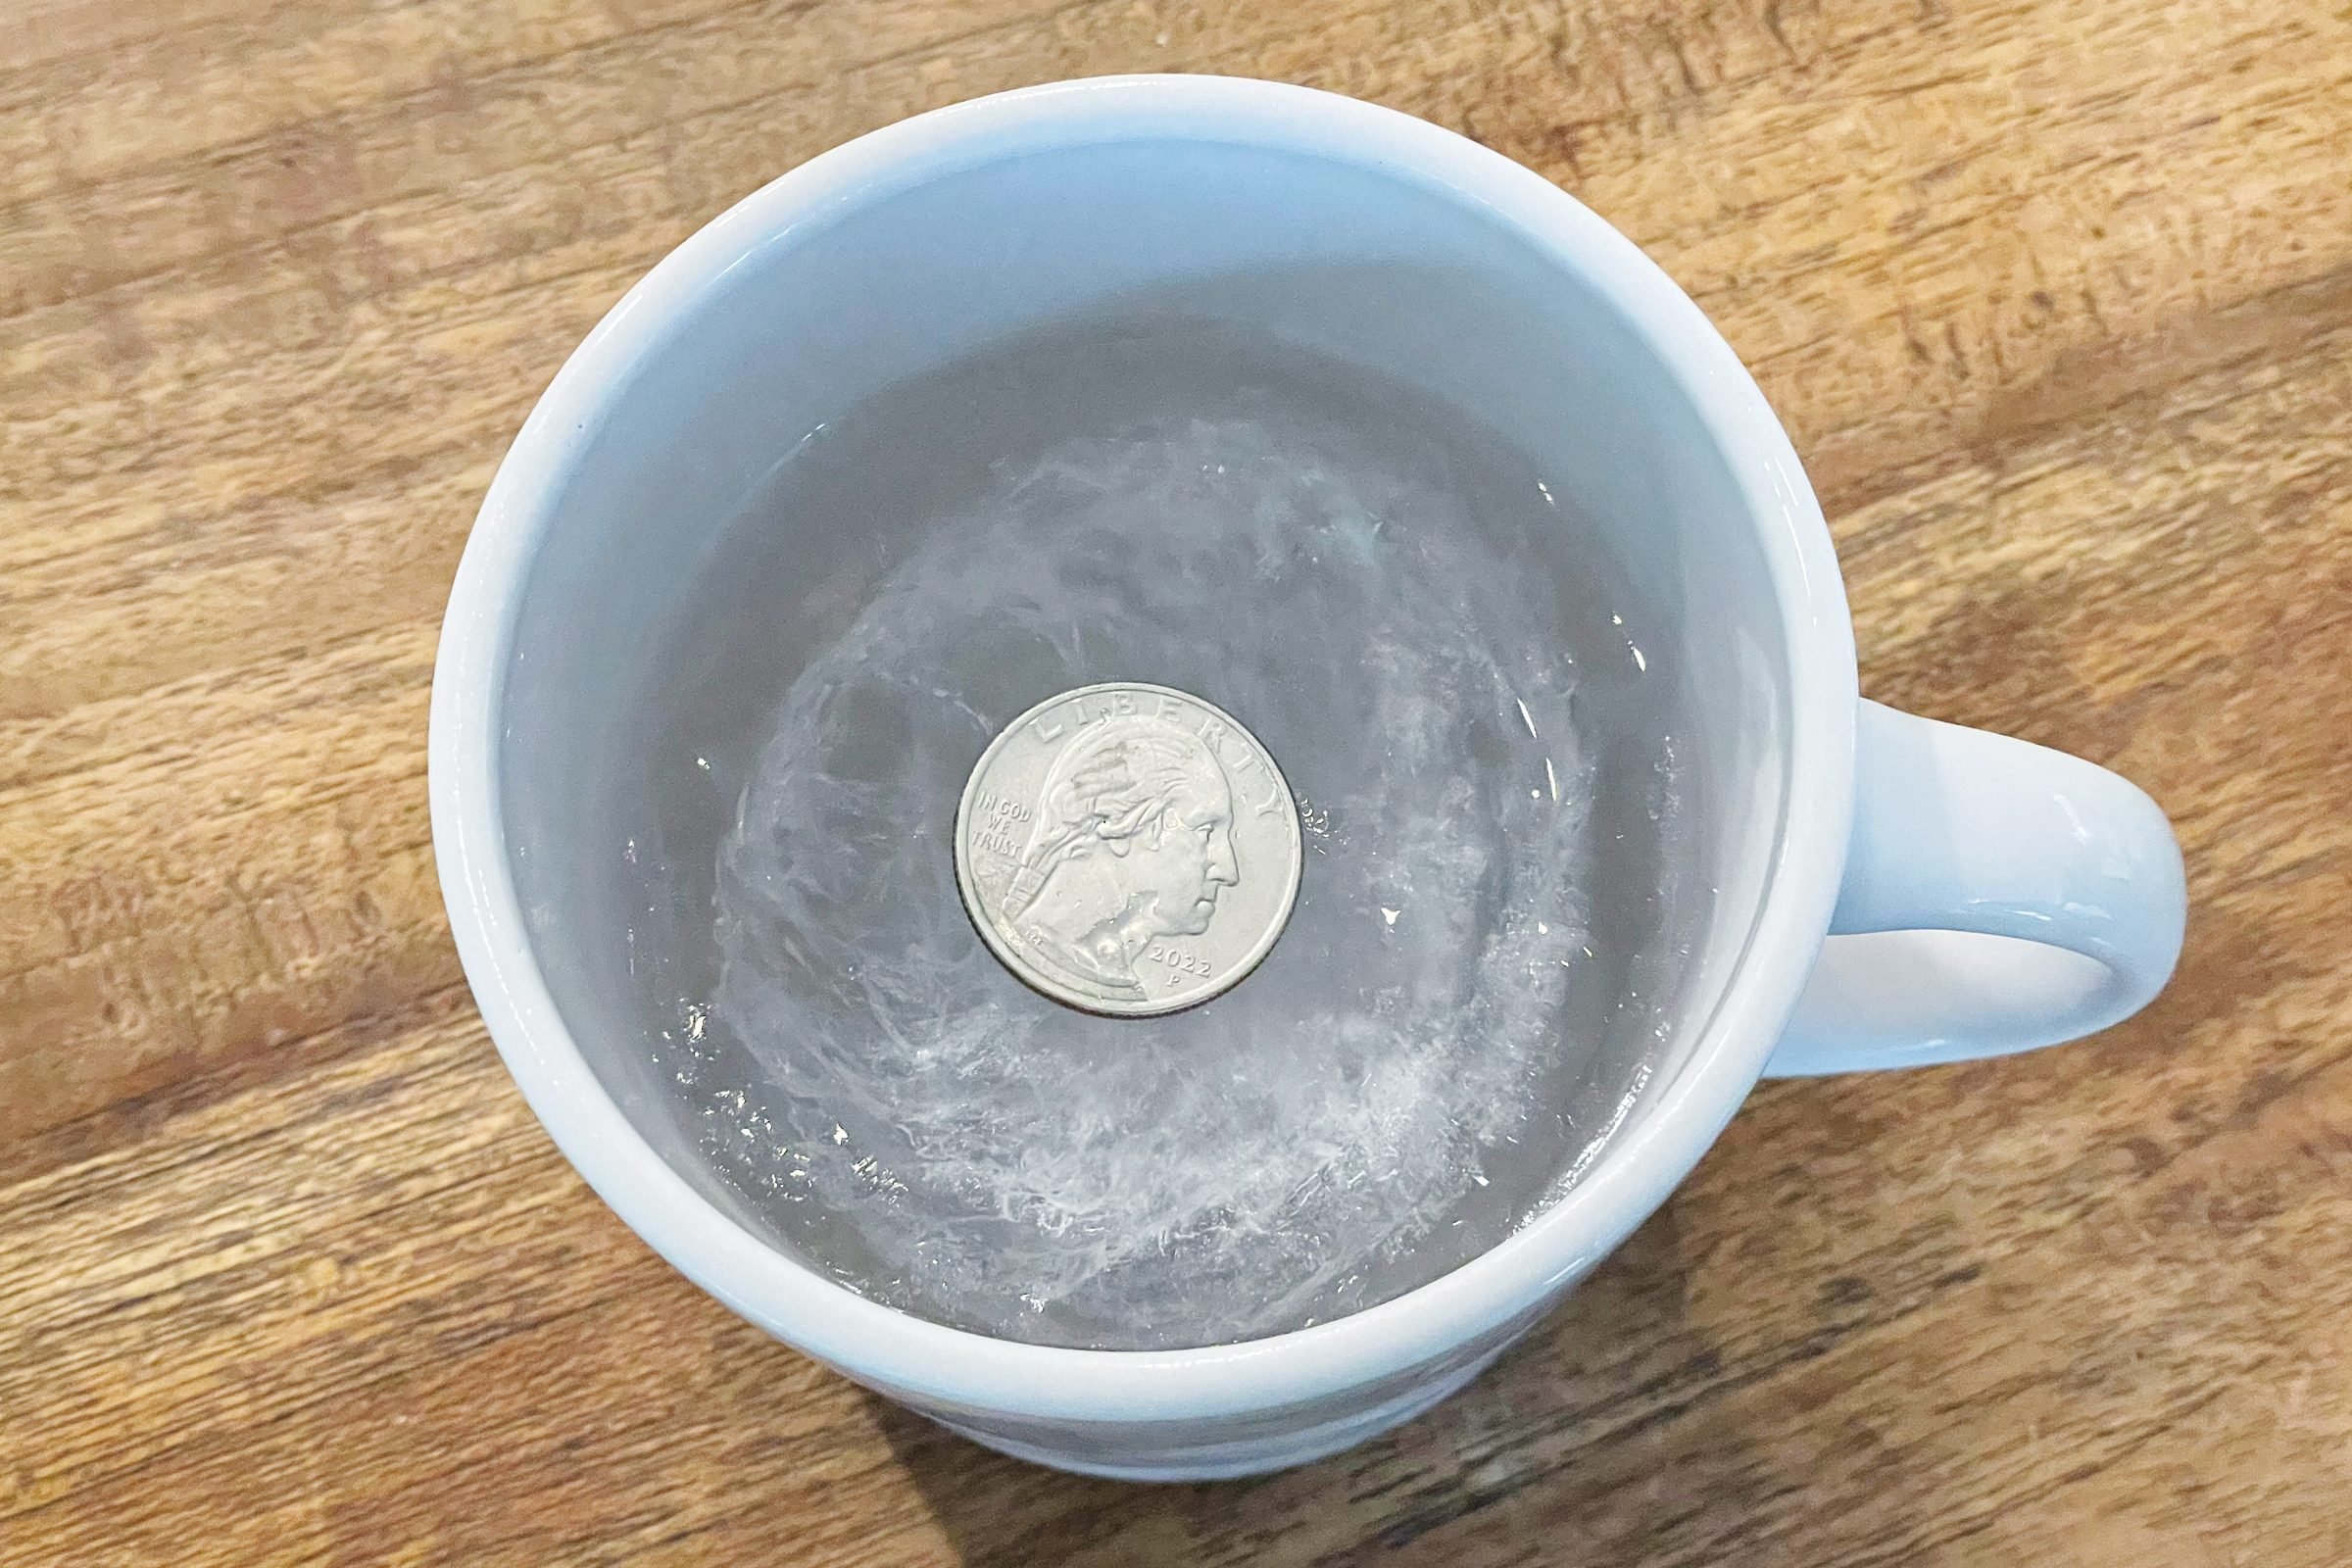 Can a Quarter on a Frozen Cup of Water Actually Determine Food